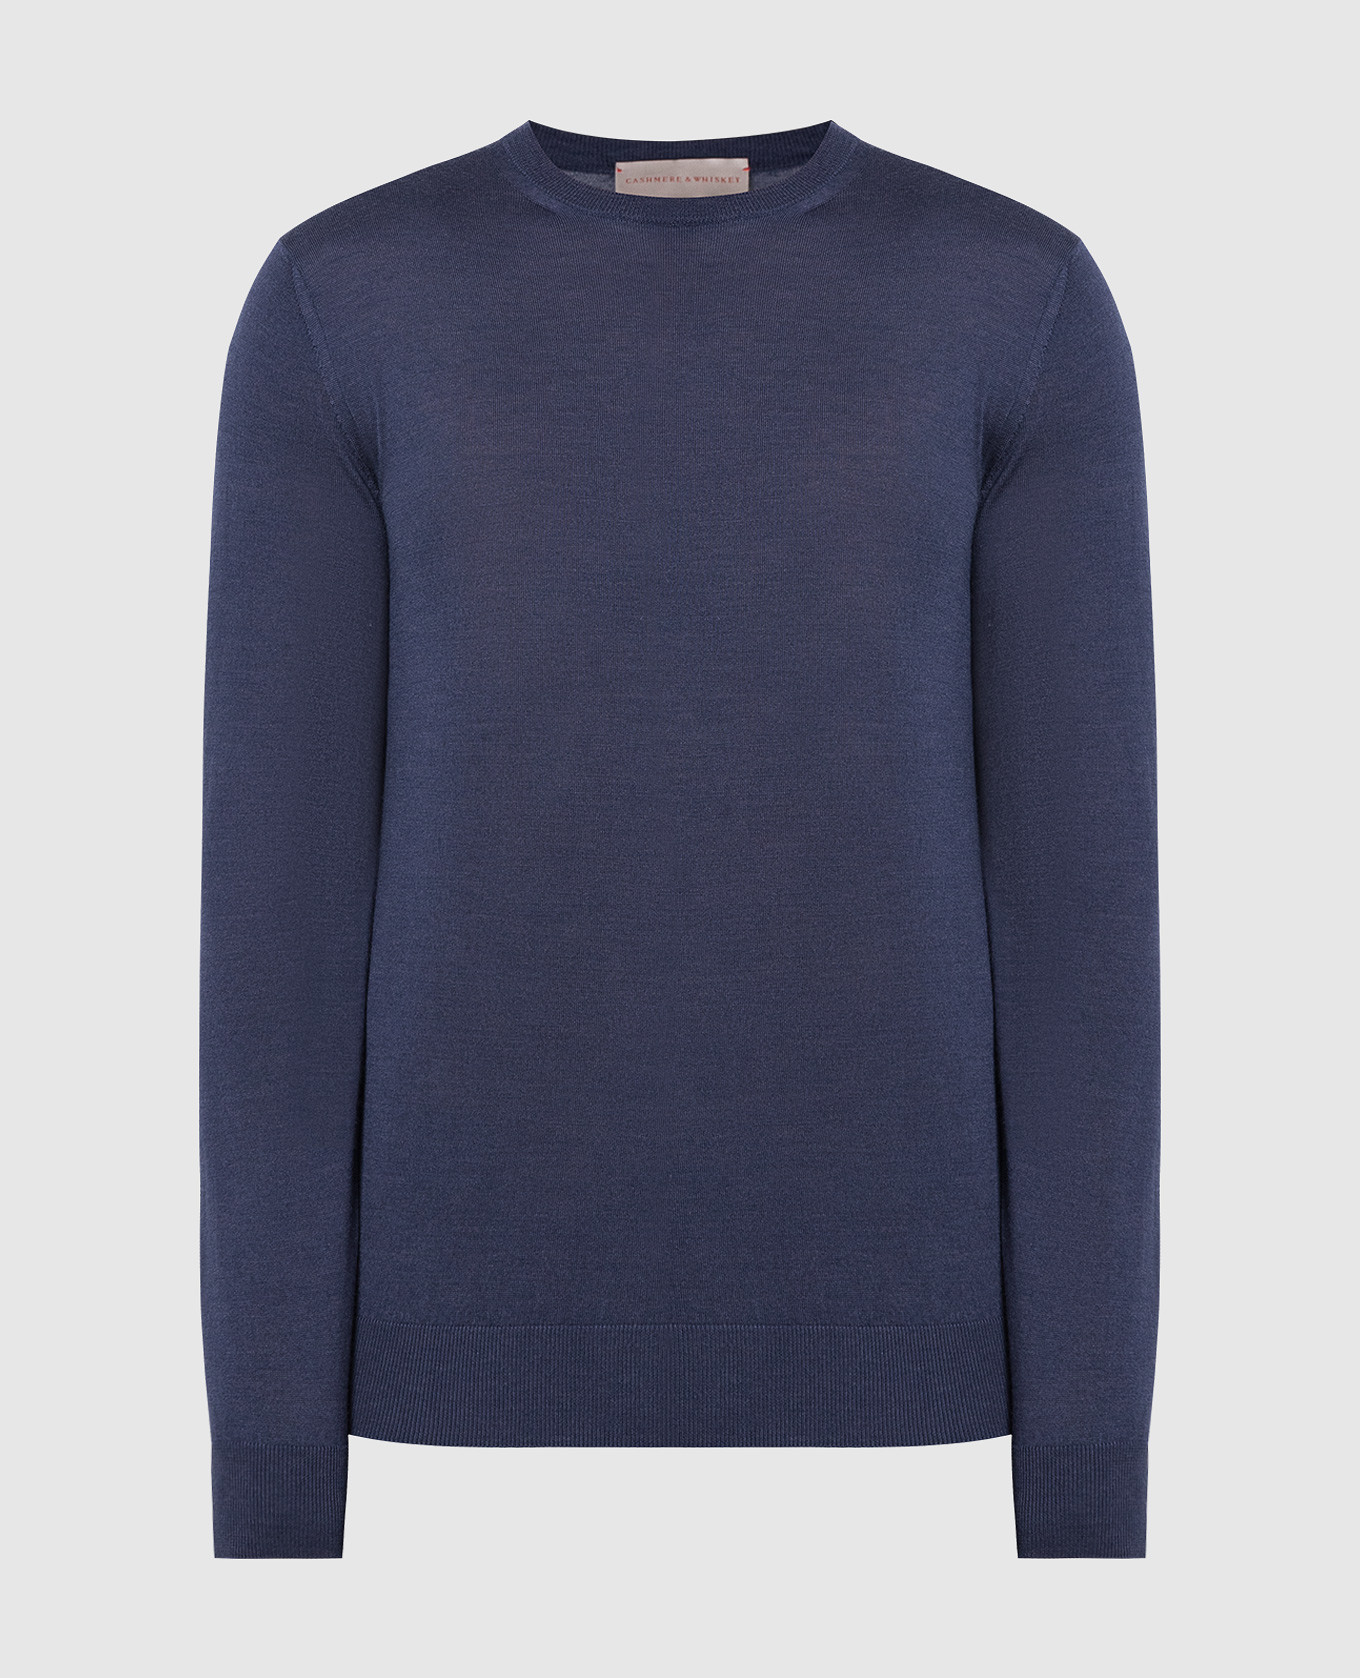 Blue wool, silk and cashmere jumper